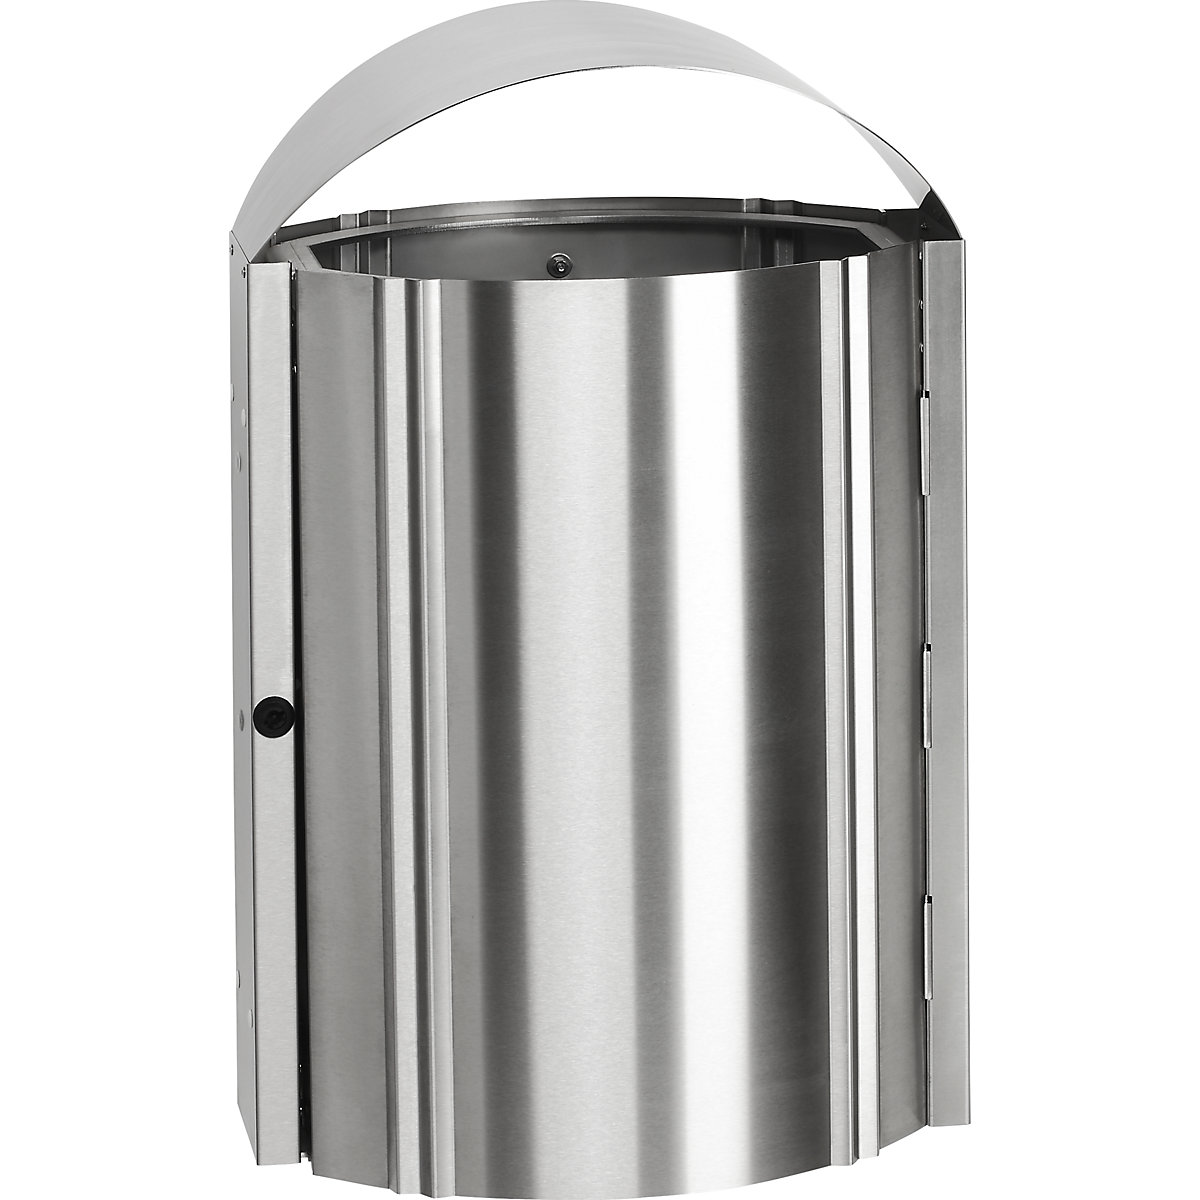 Stainless steel waste collector, outdoor areas - VAR